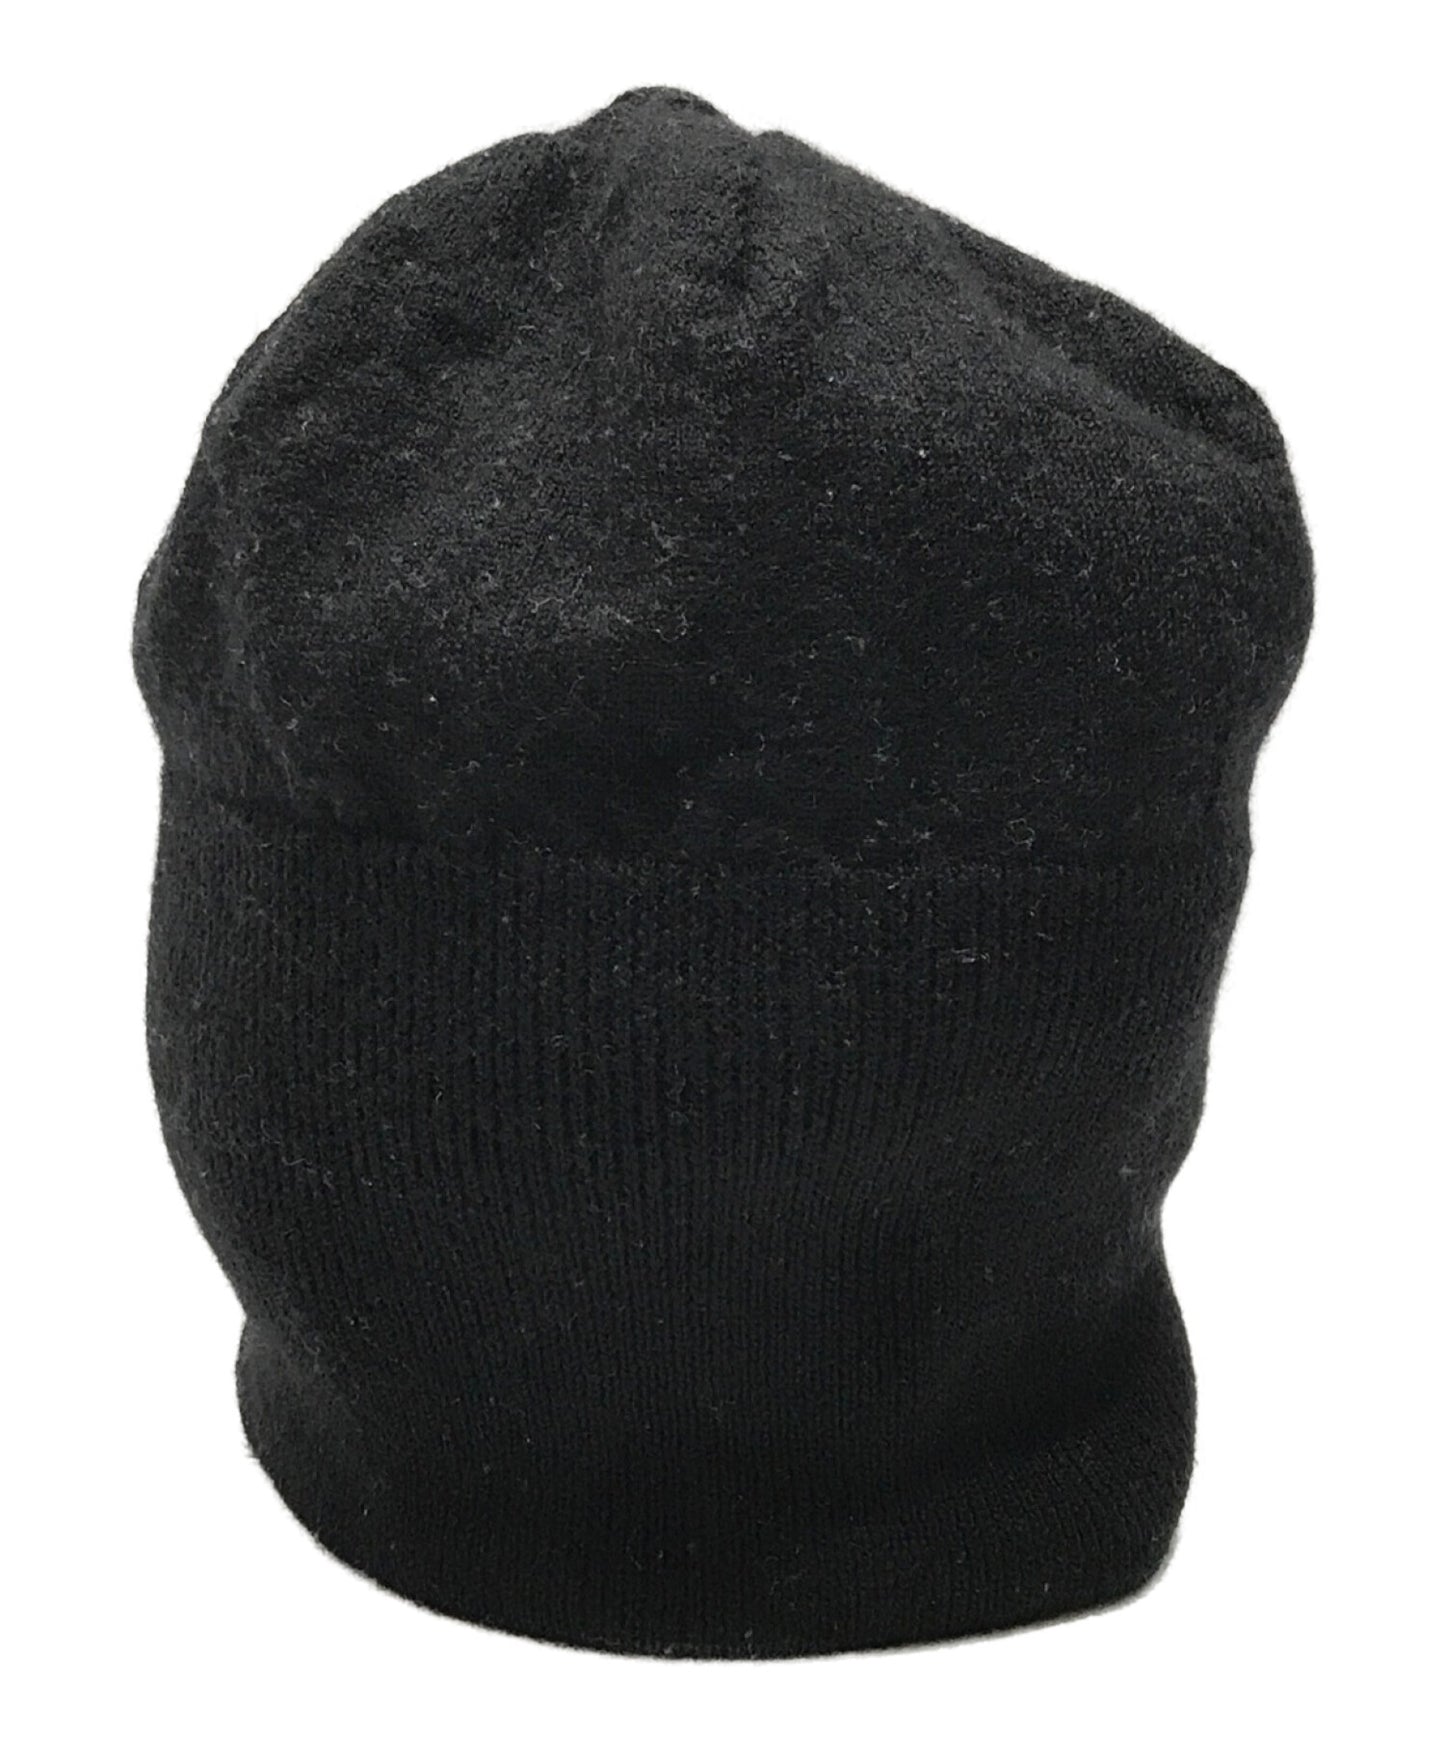 [Pre-owned] Dior Homme by Hedi Slimane knit cap 6HH4090161